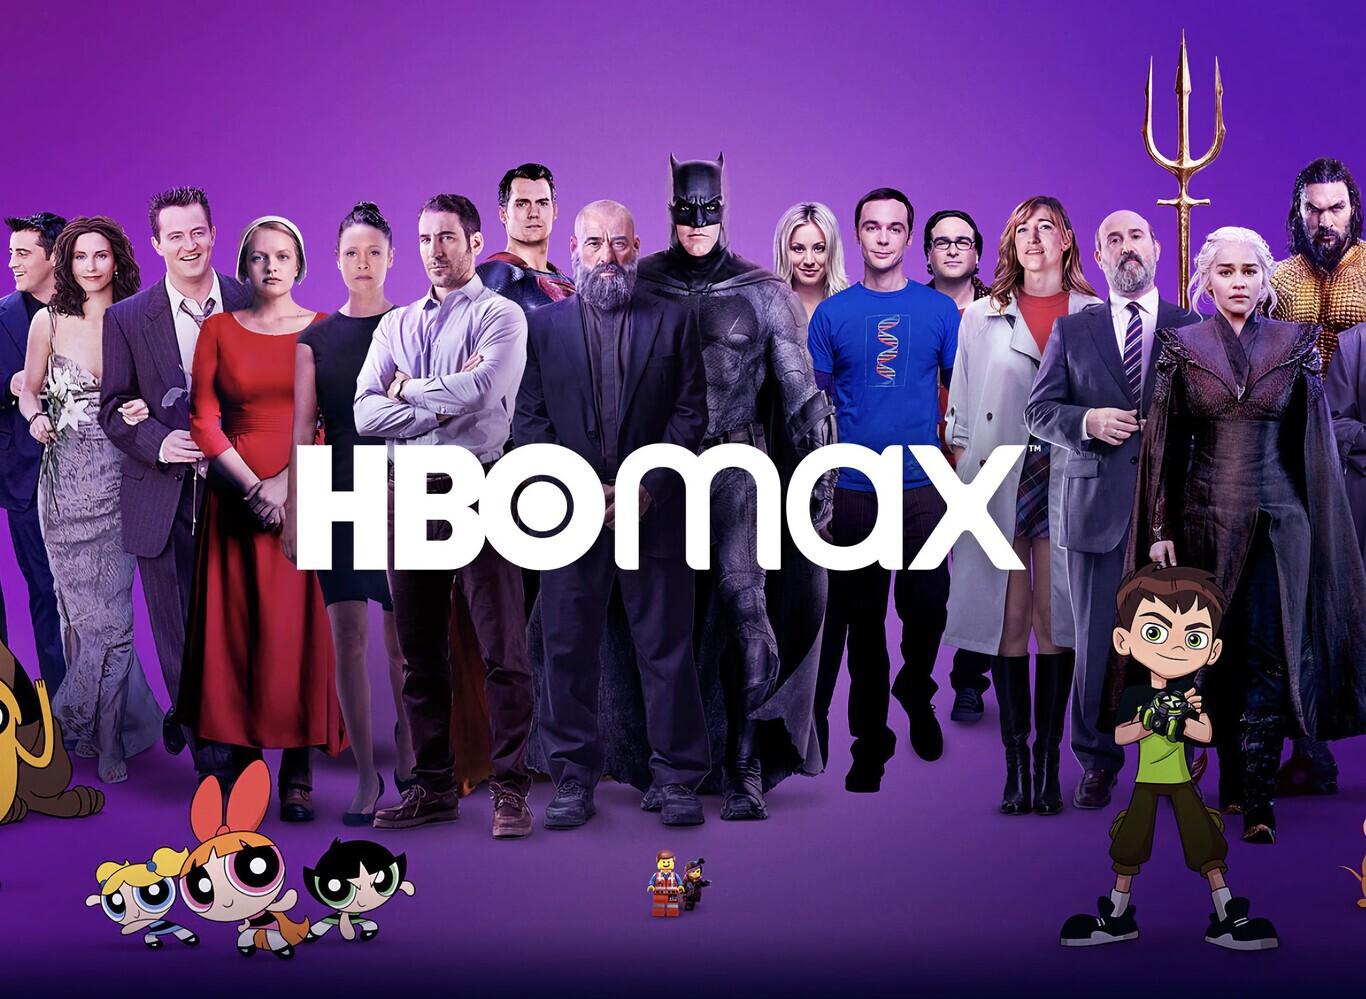 HBO Max sign with various characters from TV shows